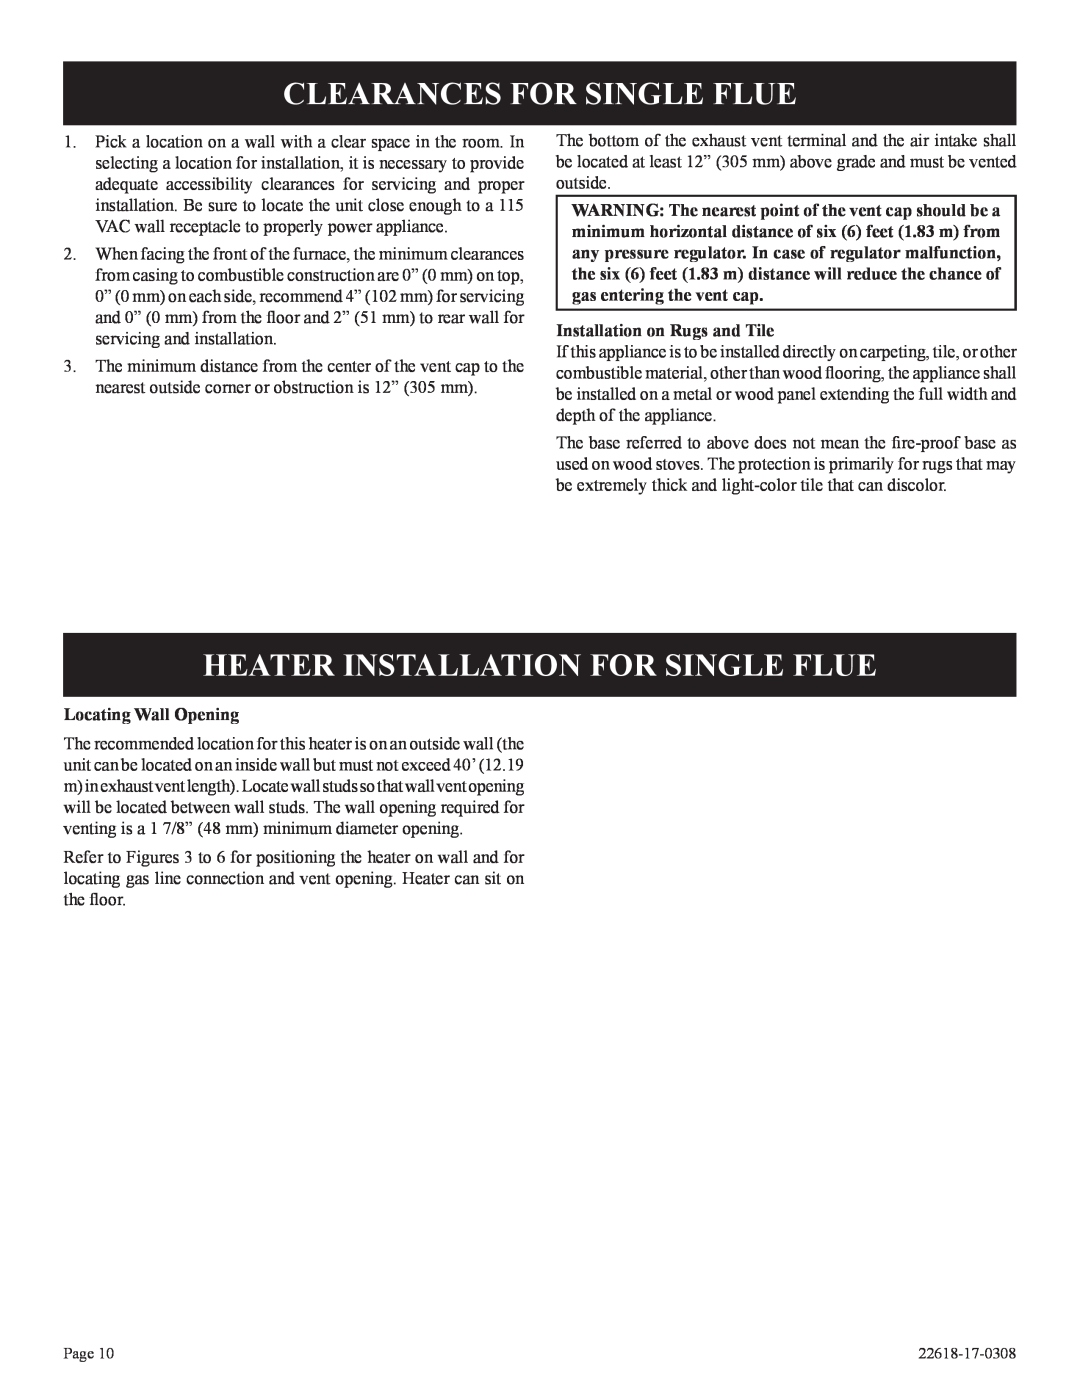 Empire Comfort Systems BP)-1, GN, CP Clearances For Single Flue, Heater Installation For Single Flue, Locating Wall Opening 